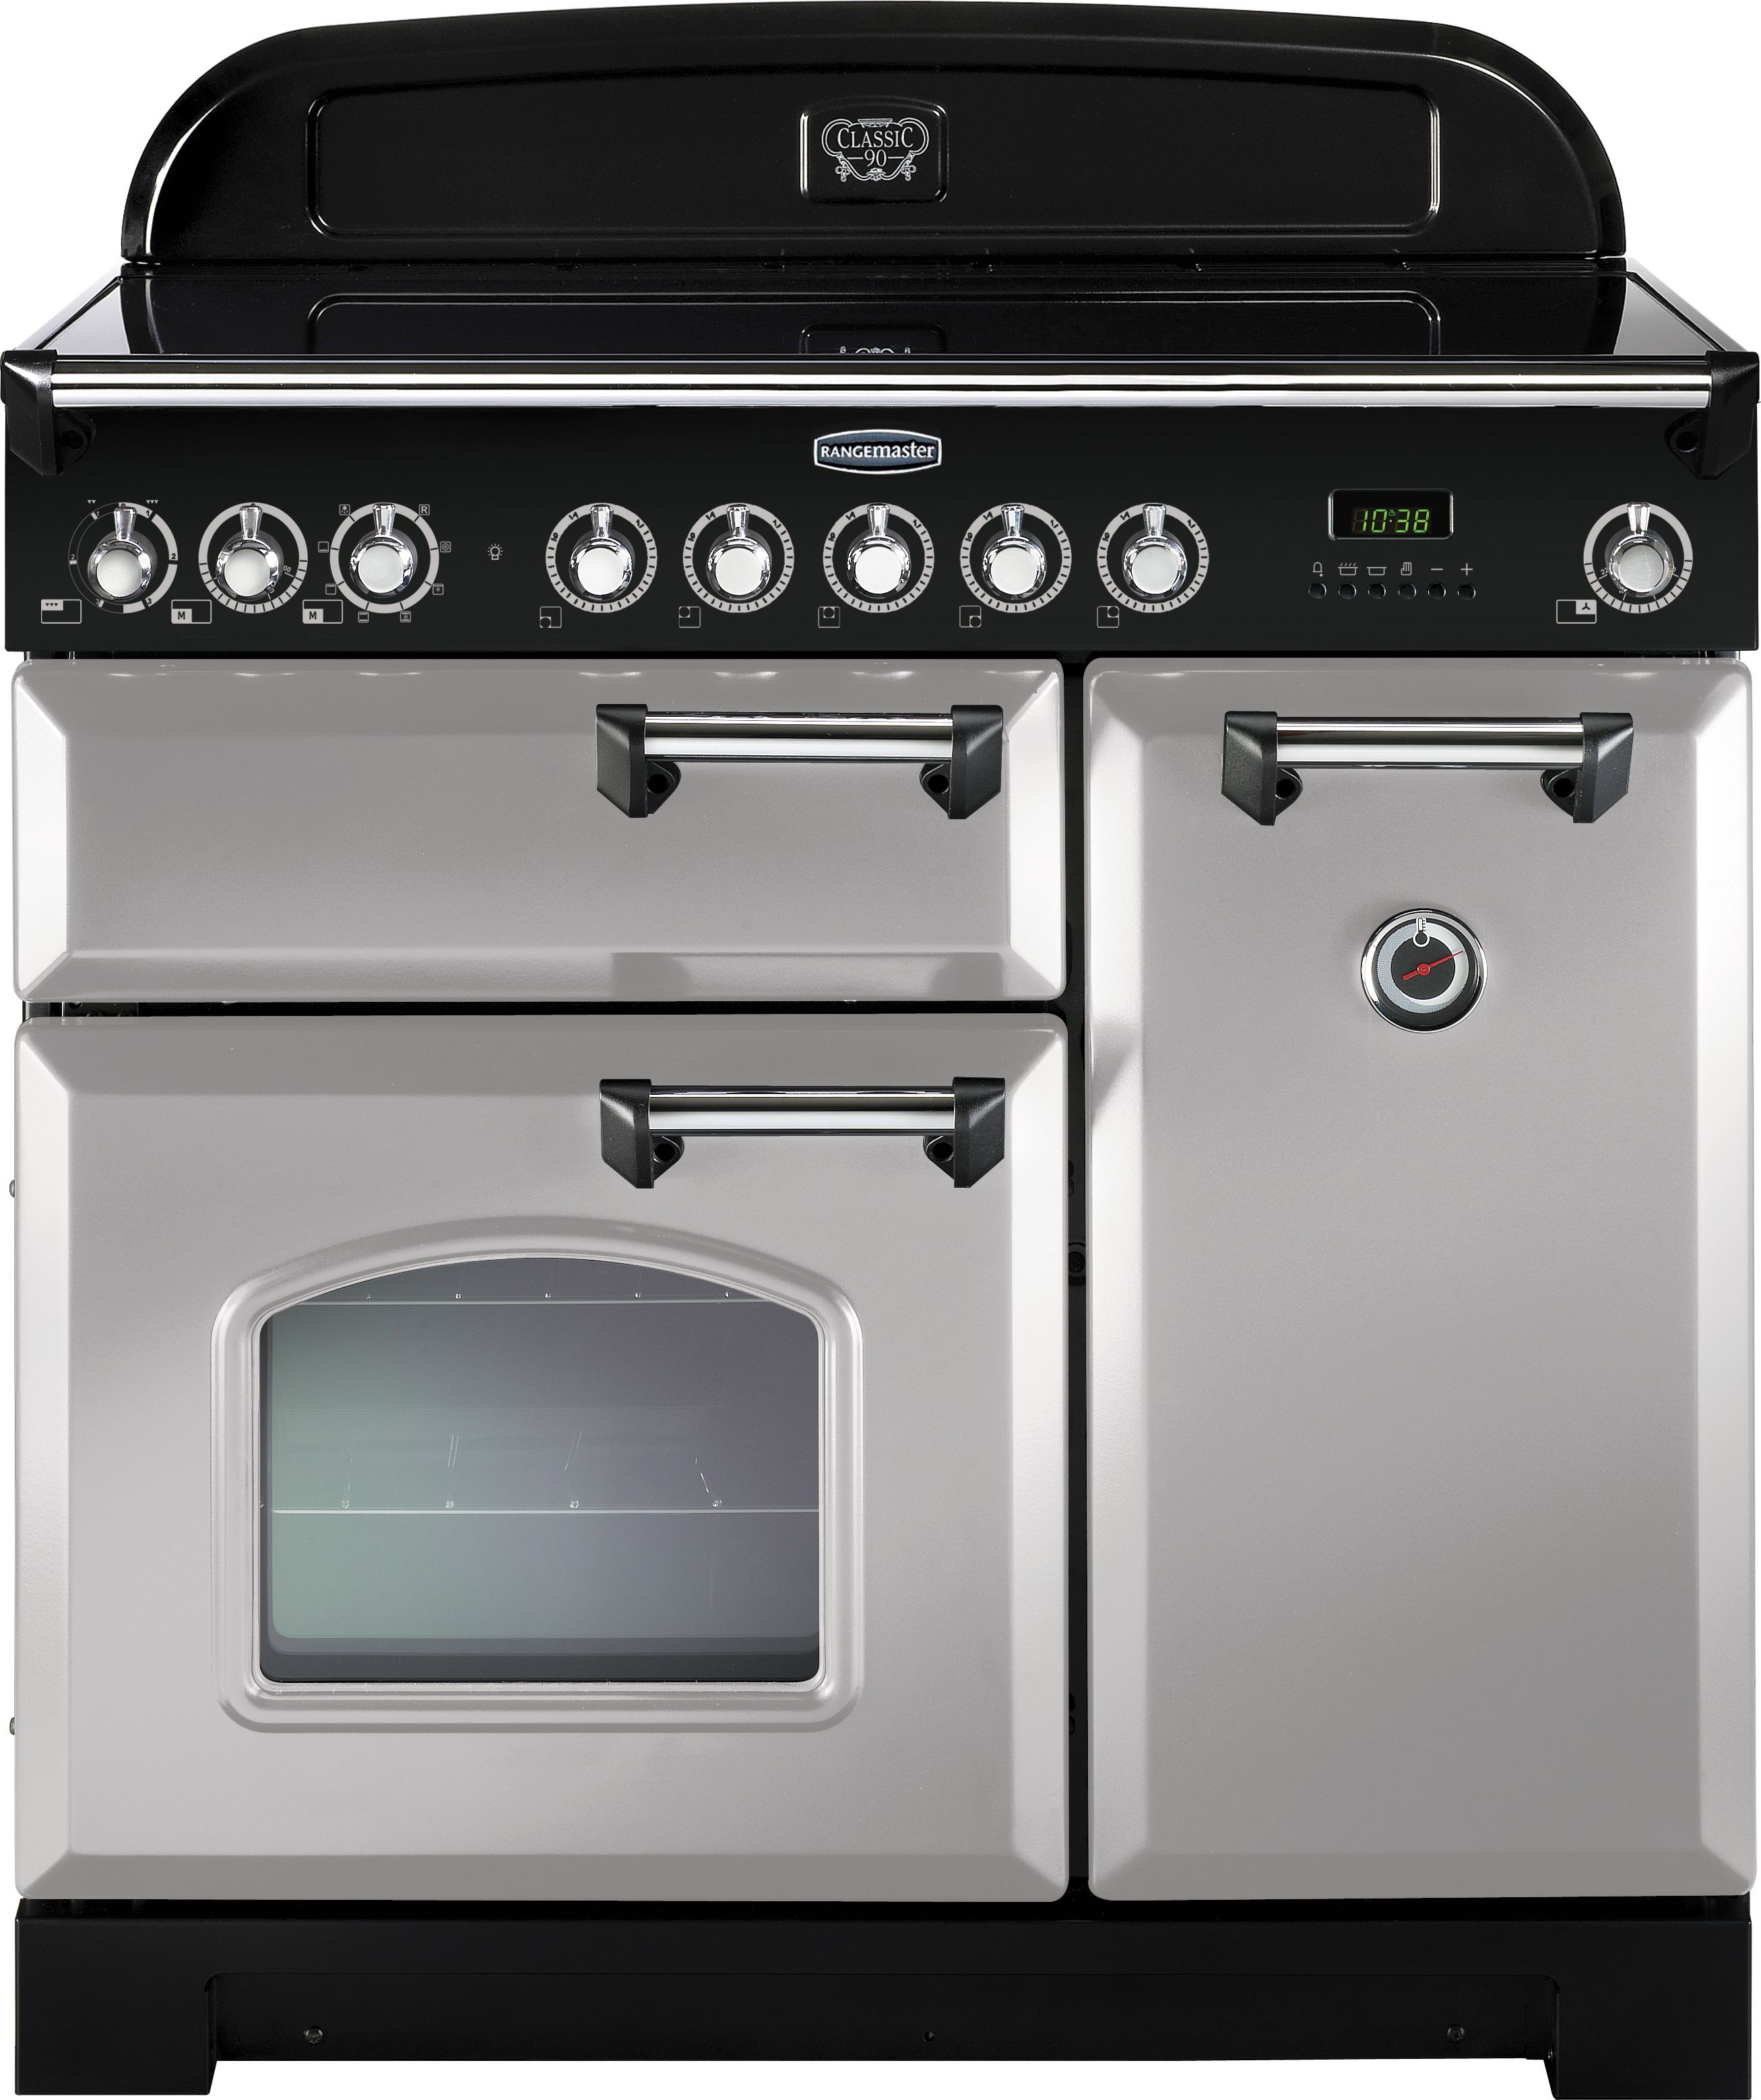 Rangemaster Classic Deluxe CDL90EIRP/C 90cm Electric Range Cooker with Induction Hob - Royal Pearl / Chrome - A/A Rated, Grey